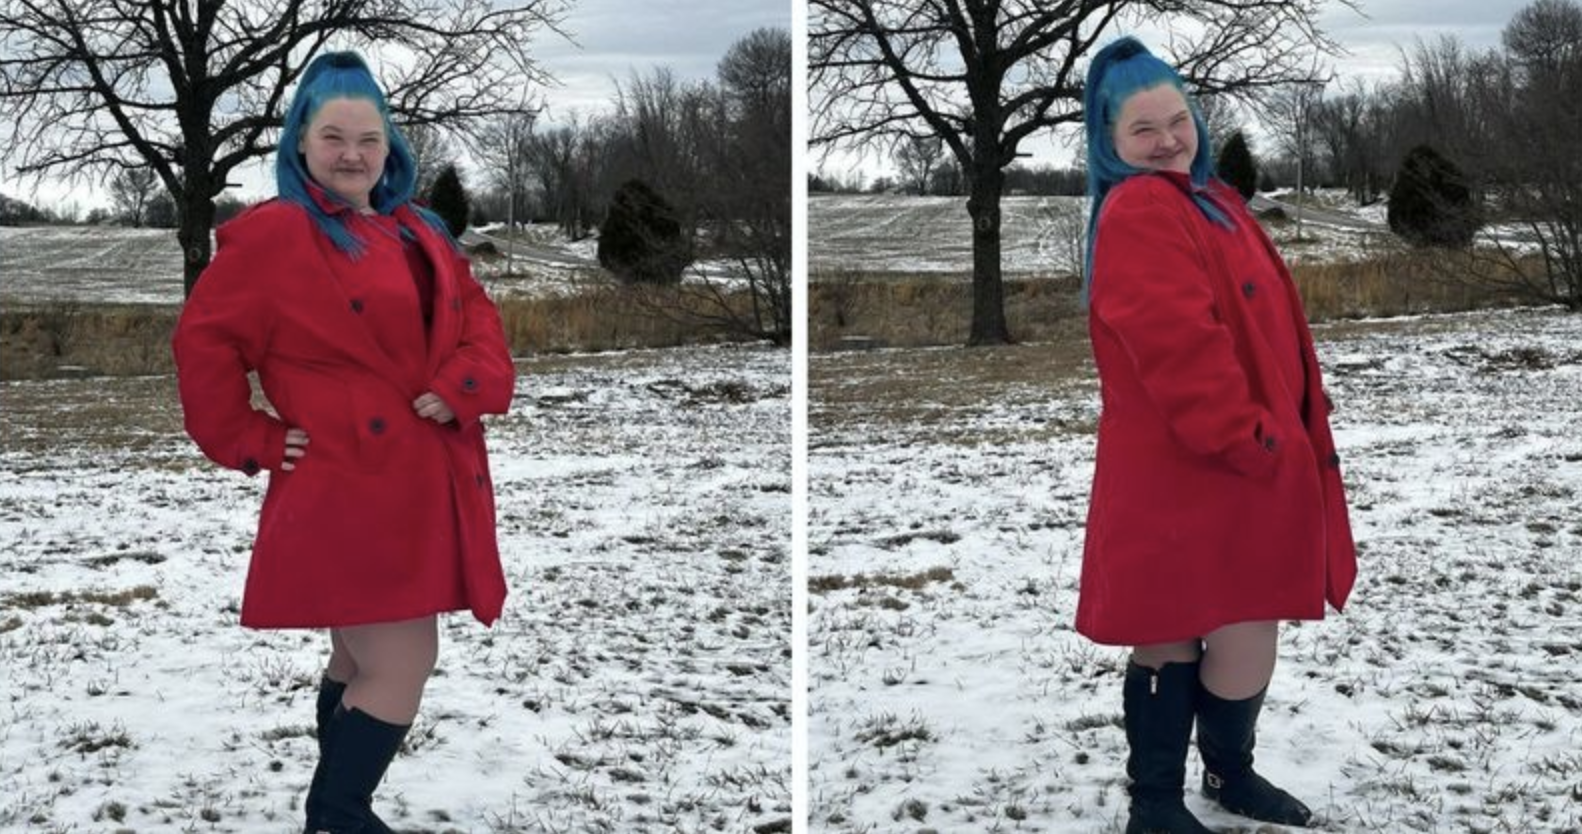 Amy Slaton, ‘1000-lb. Sisters’ Star, Stuns in Chic Red Outfit and Long Boots with Her Slim Figure.